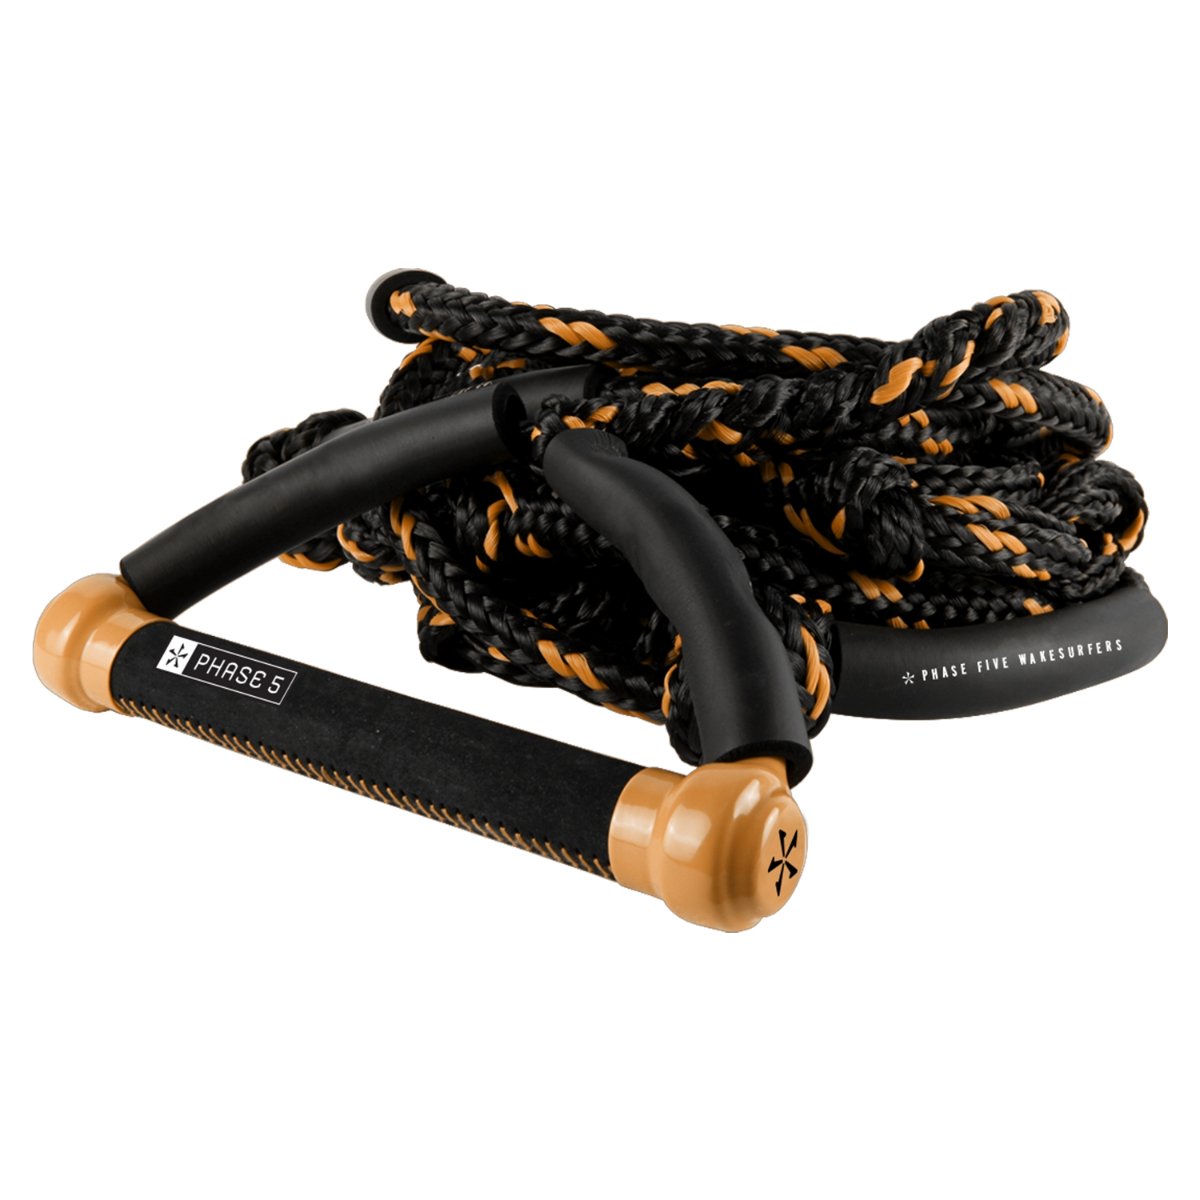 Phase 5 Pro Surf Rope in Tan - BoardCo